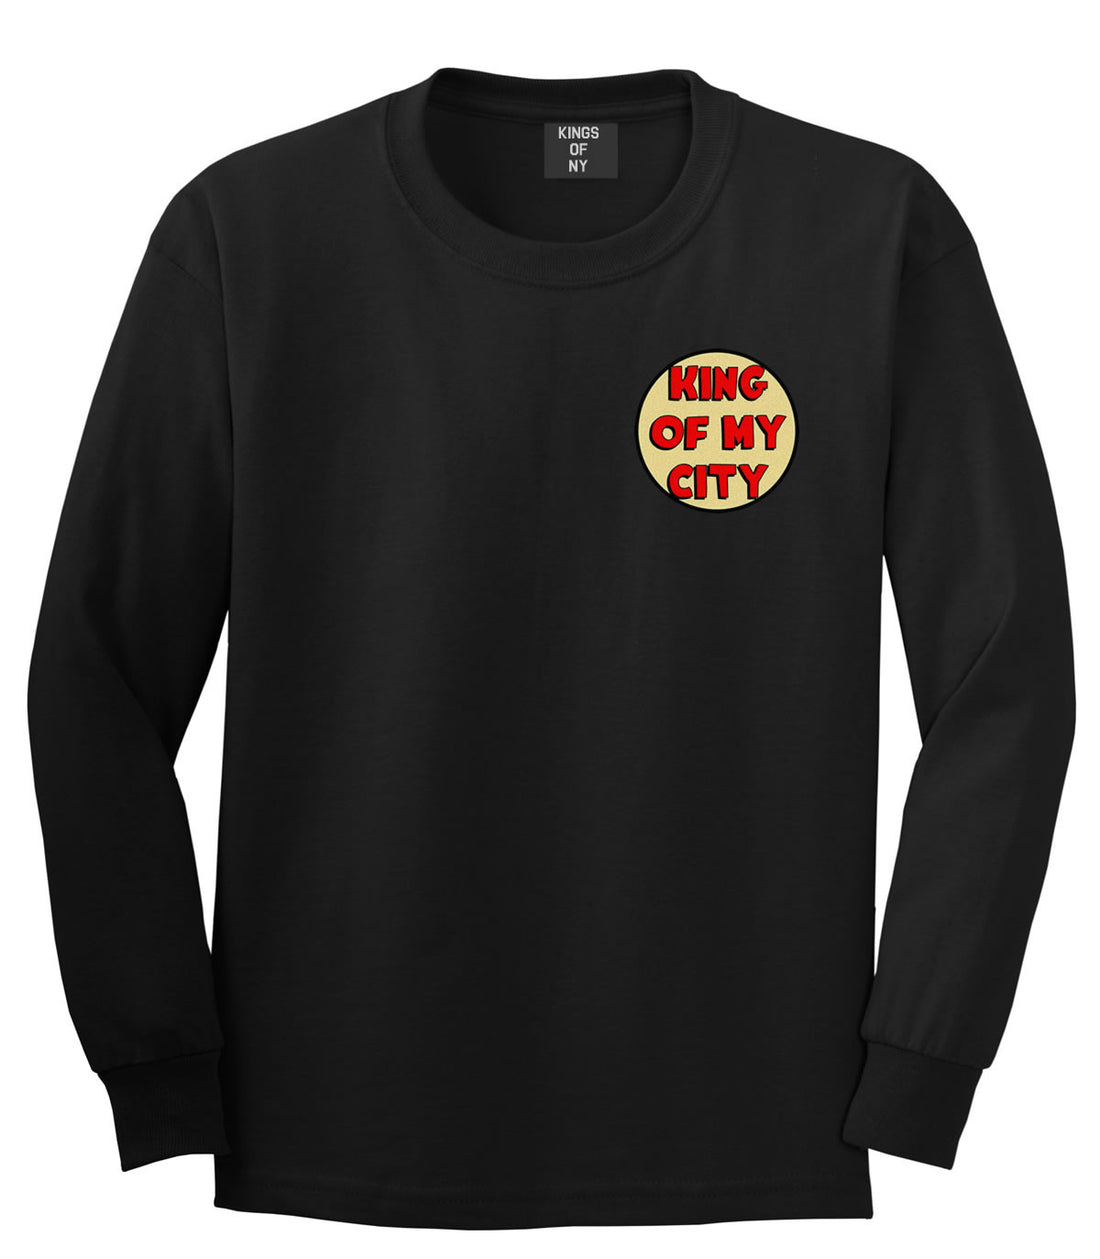 King Of My City Chest Logo Boys Kids Long Sleeve T-Shirt in Black by Kings Of NY